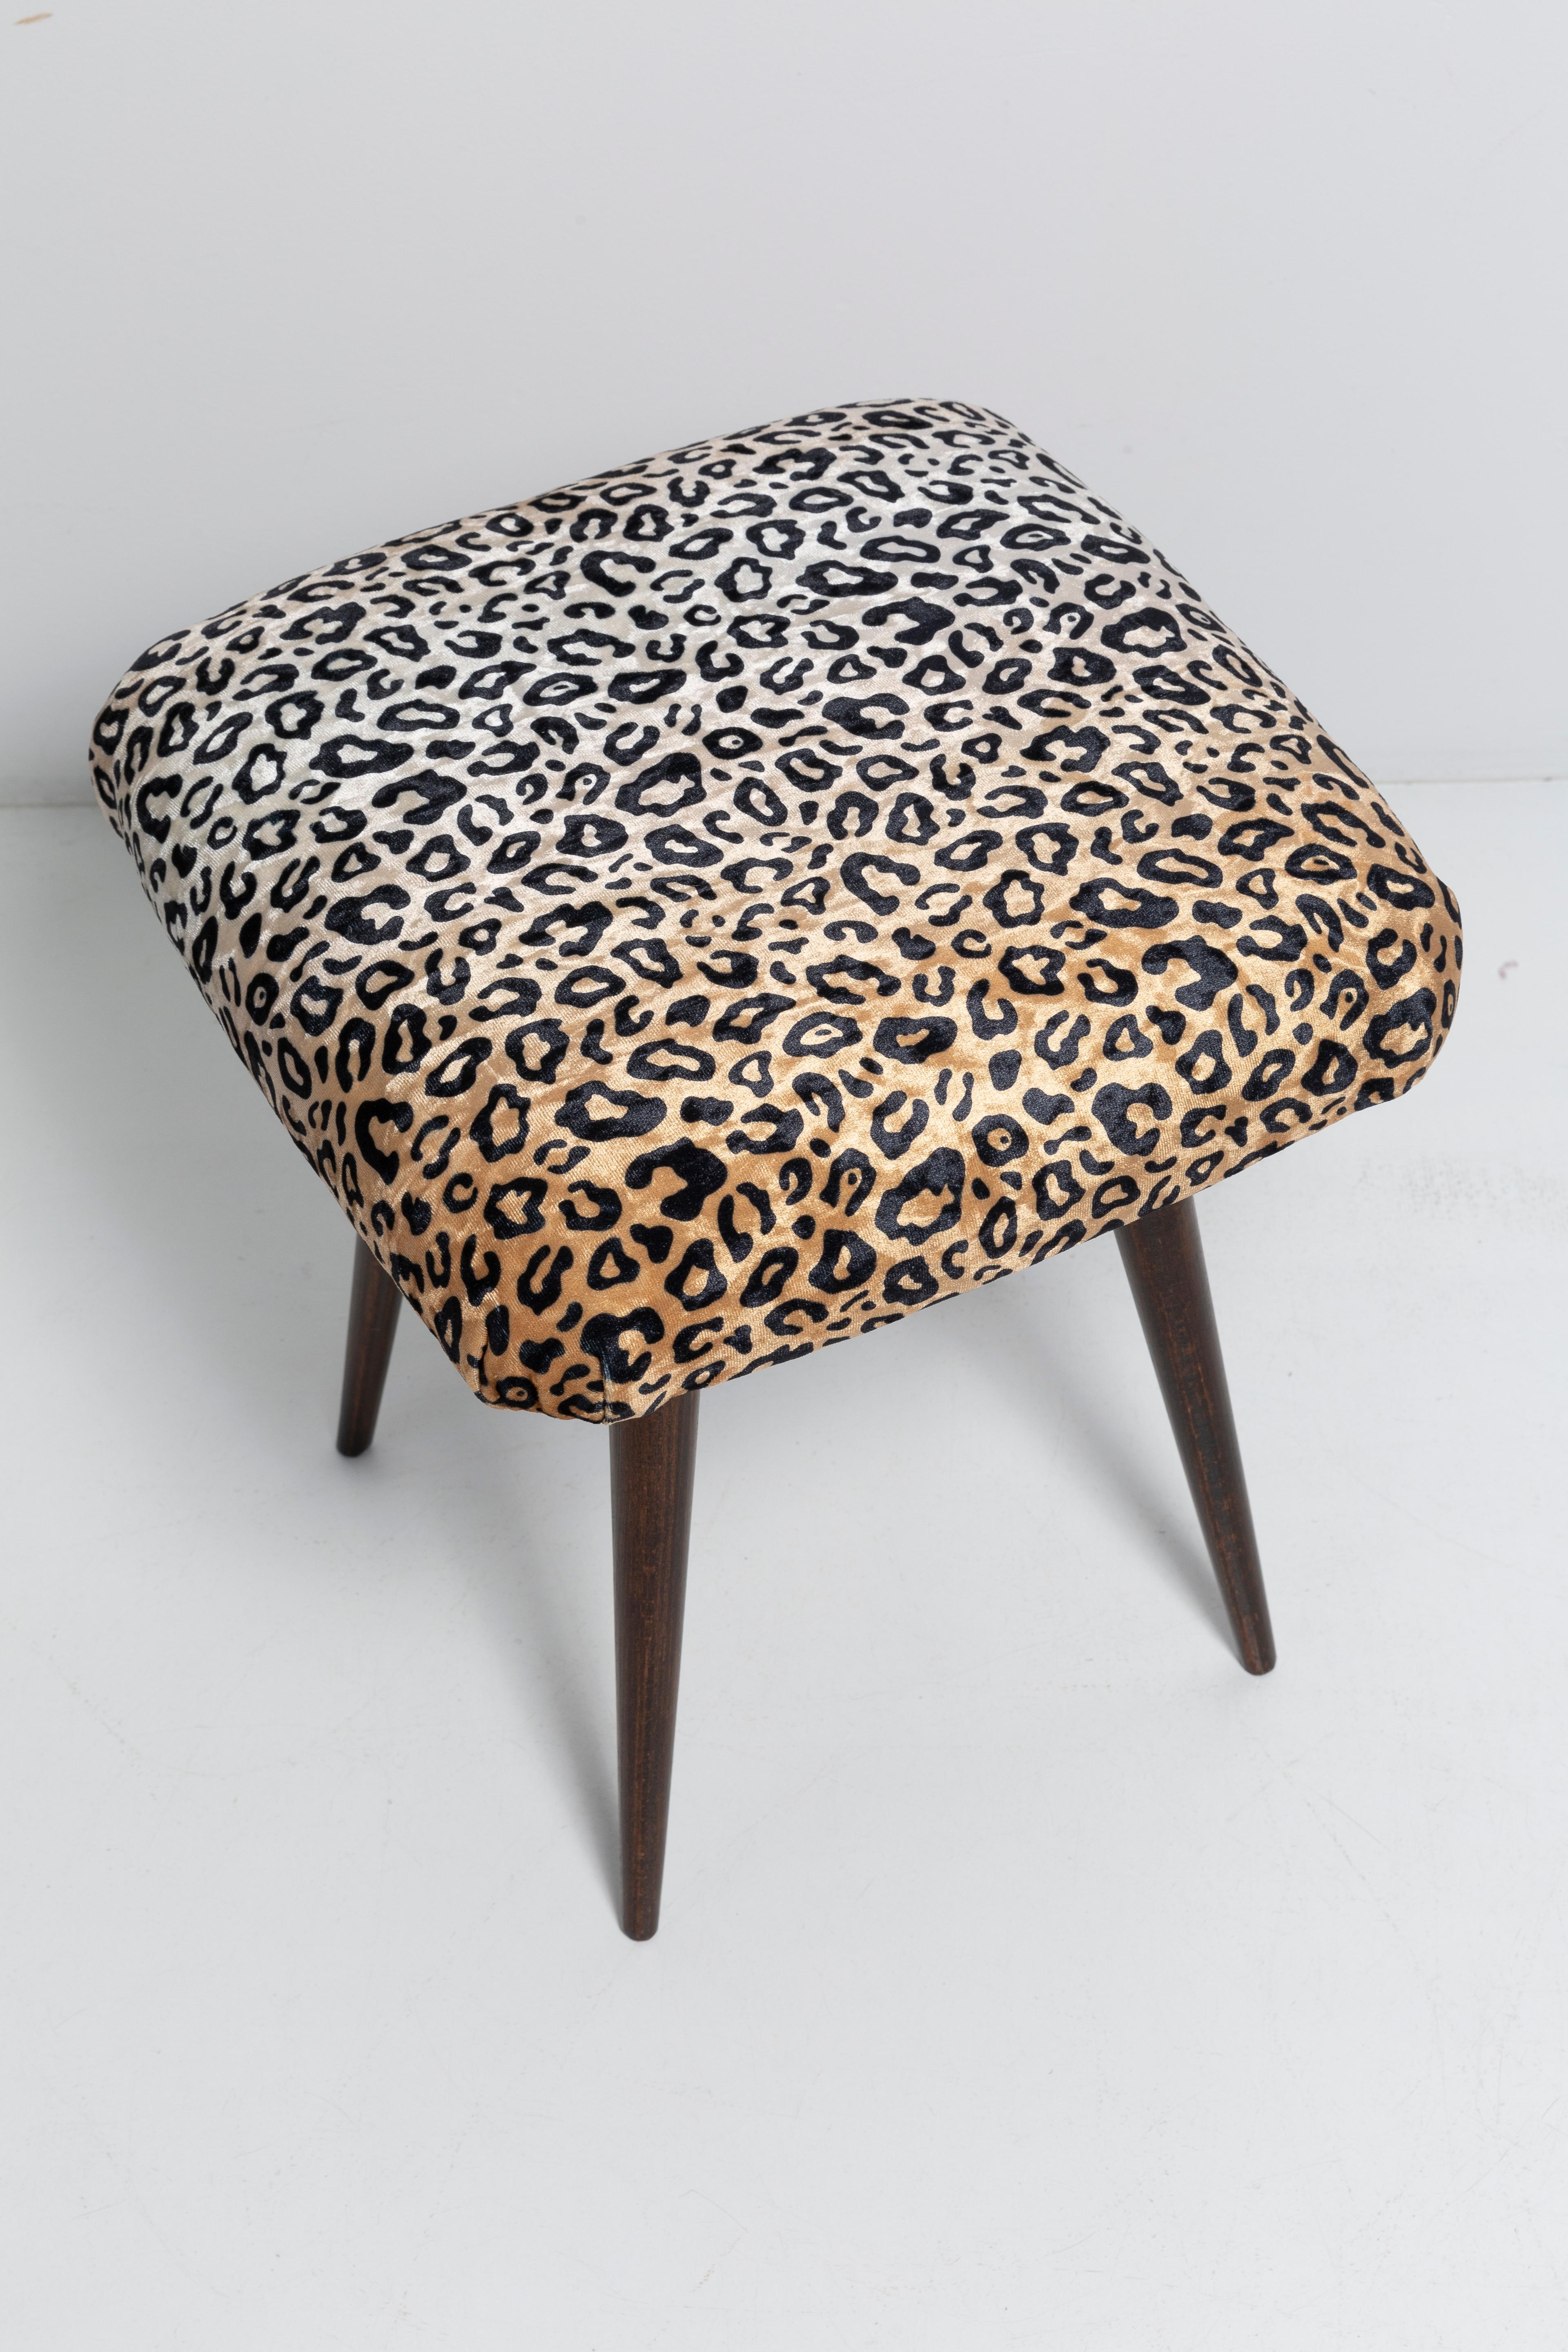 Hand-Crafted 20th Century Leopard Velvet Vintage Stool, Europe, 1960s For Sale